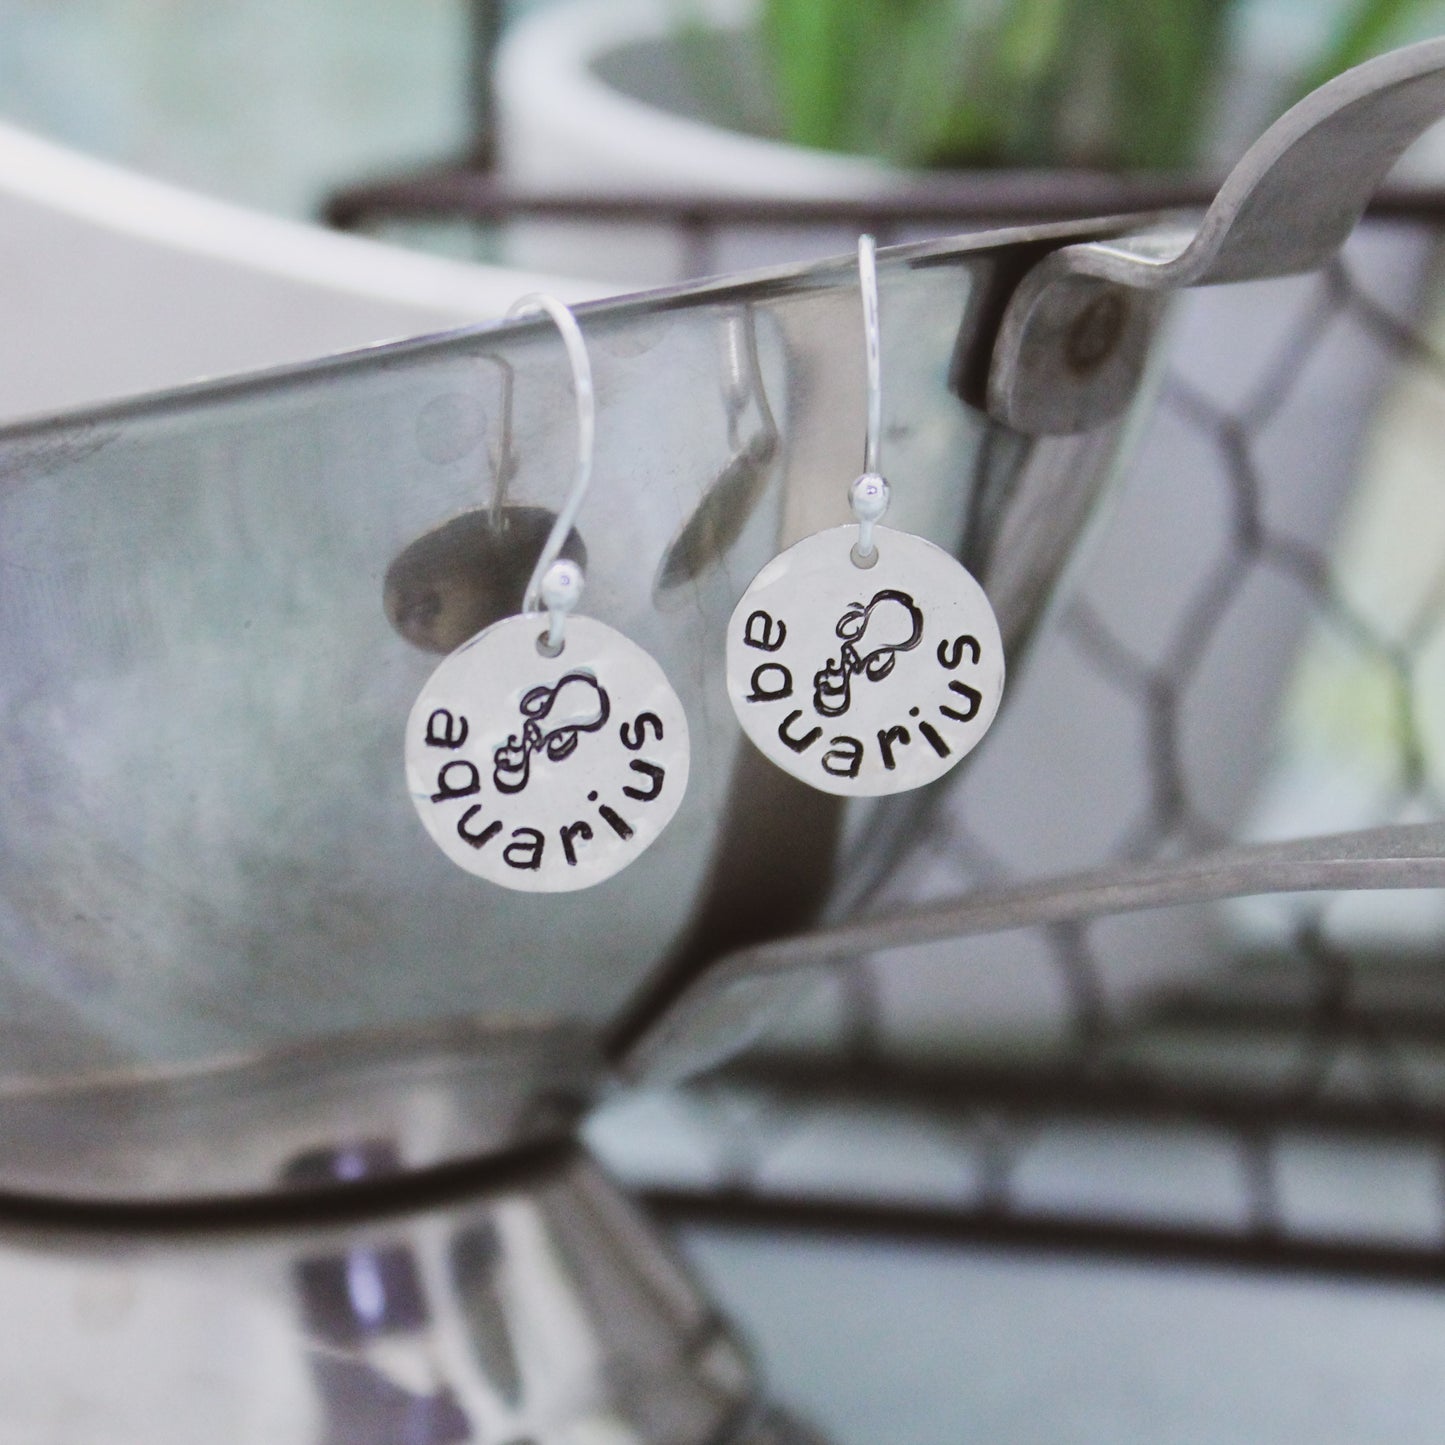 Aquarius Sterling Silver Earrings, Zodiac Sign Jewelry, Hand Stamped Personalized Earrings, Aquarius Zodiac Jewelry Unique Gift for Her